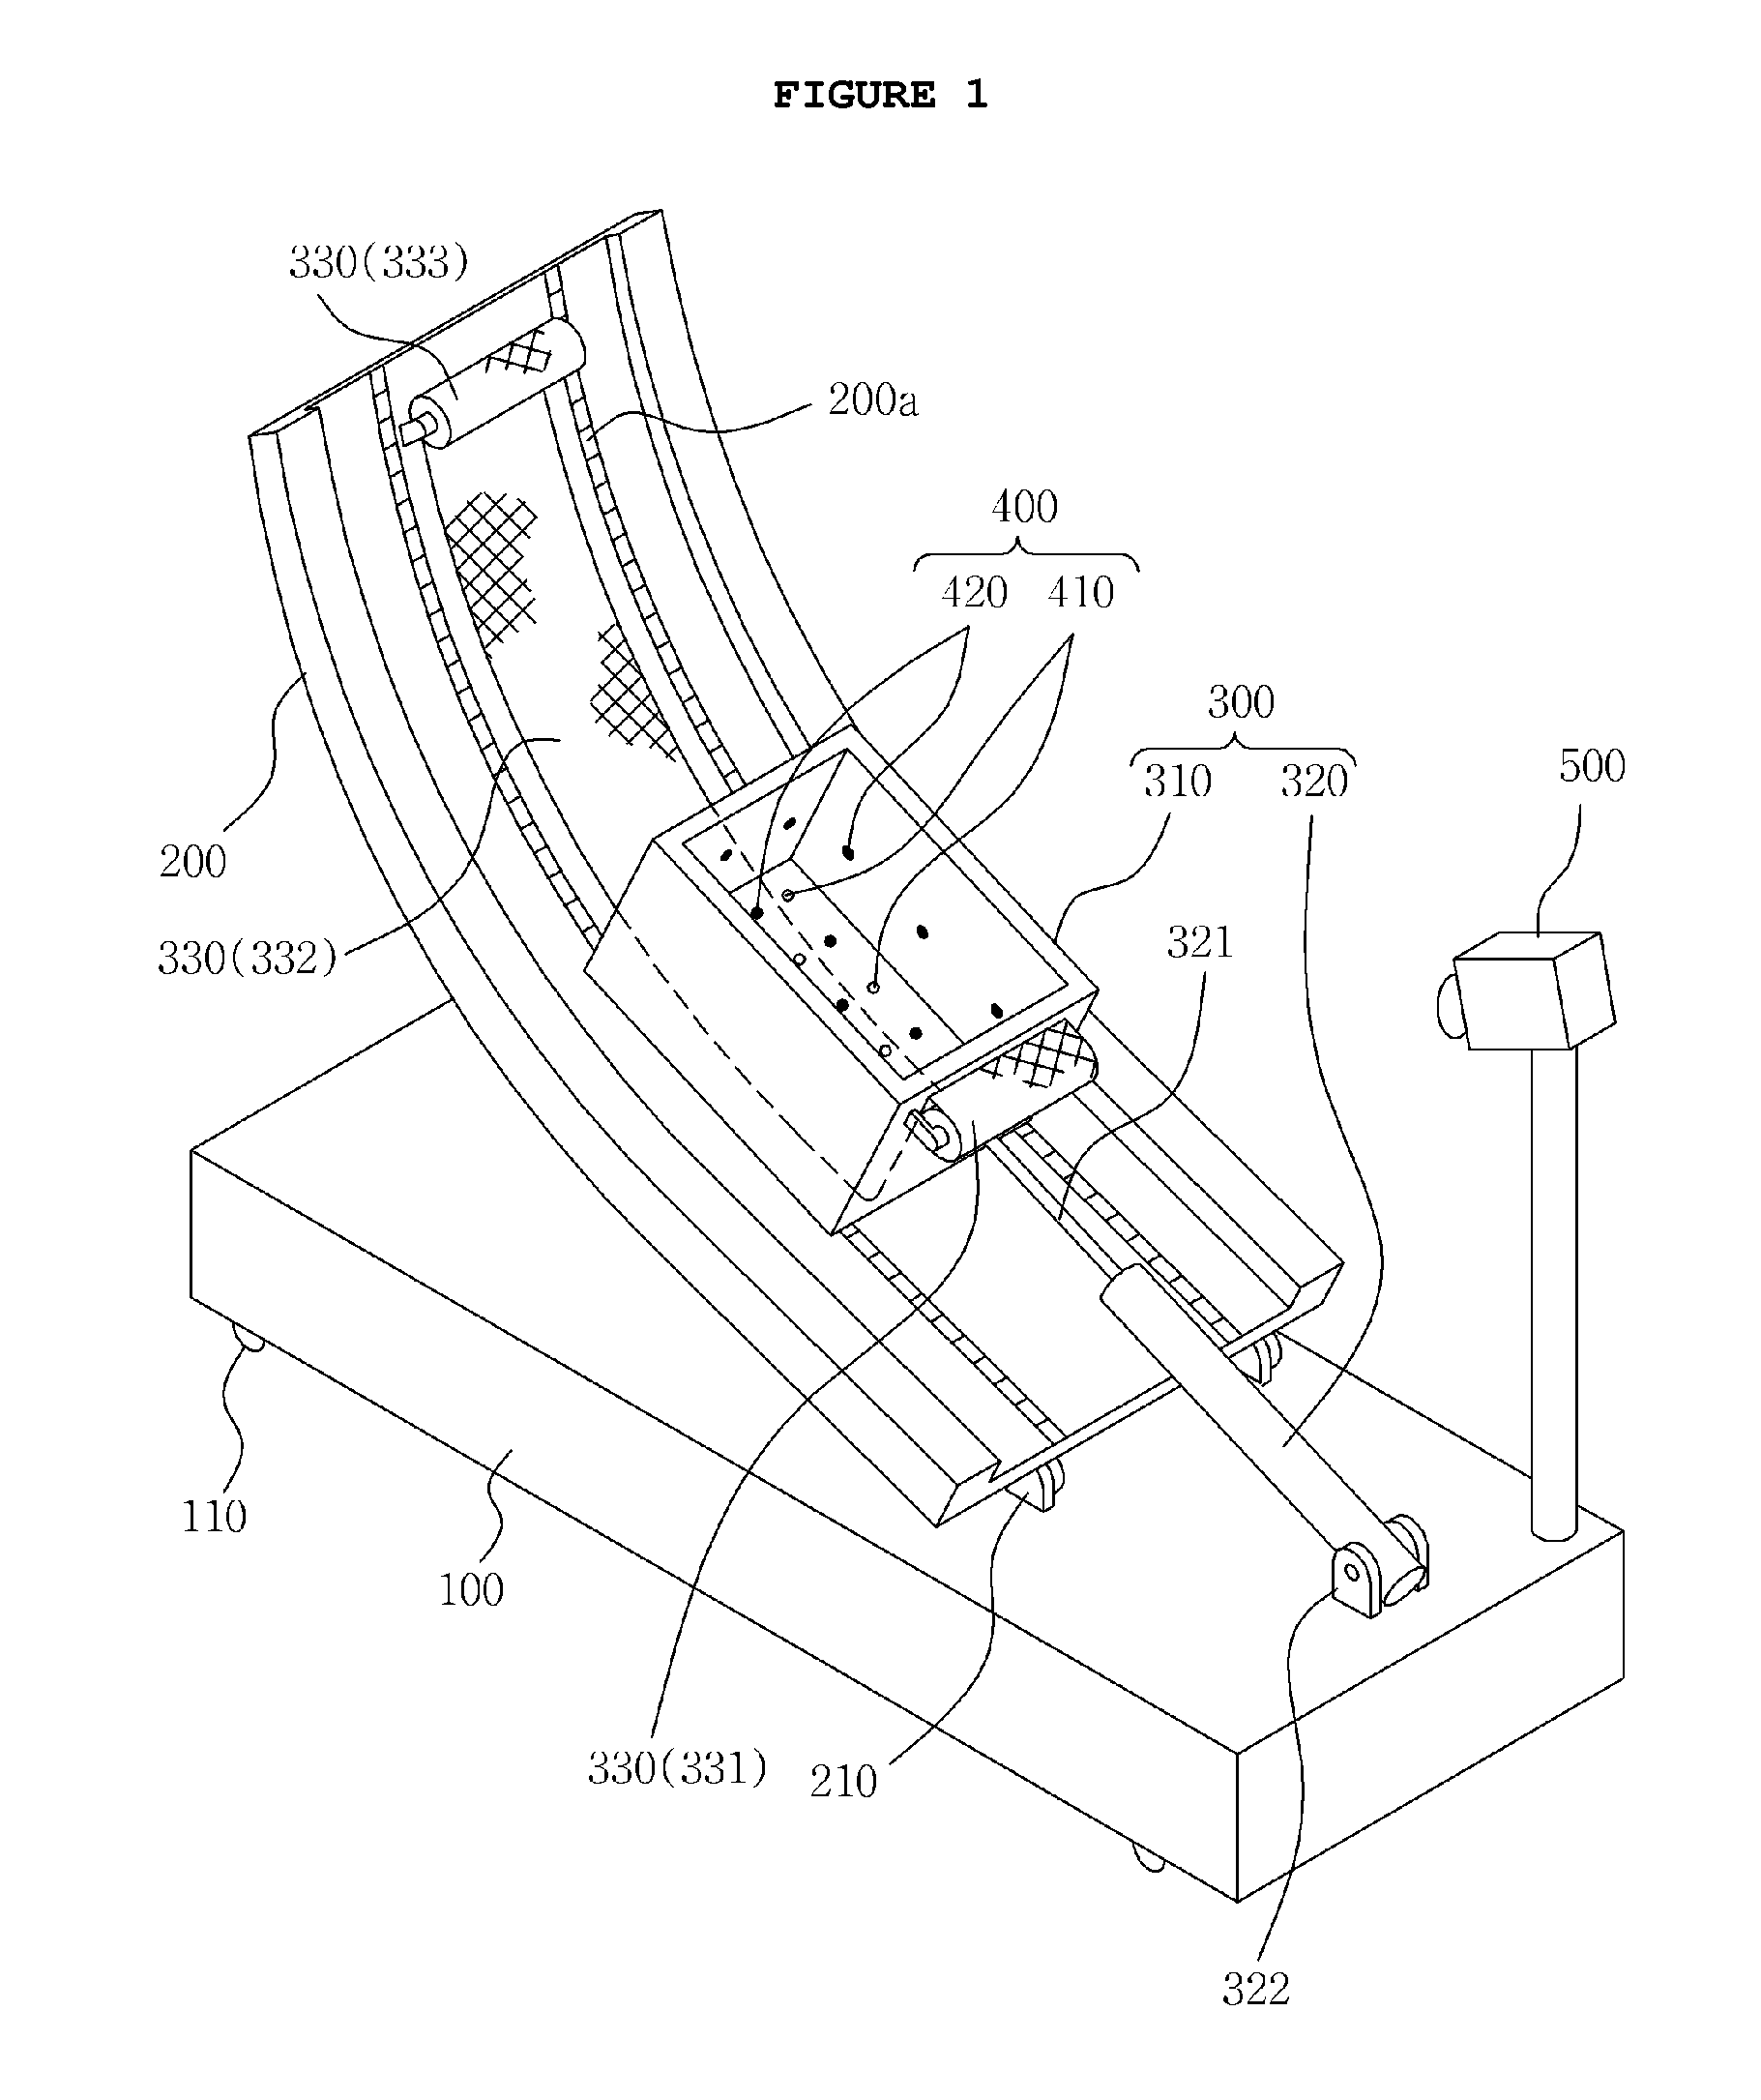 Test apparatus for early landslide detection fully-connected with pore water pressure, surface displacement and shear surface